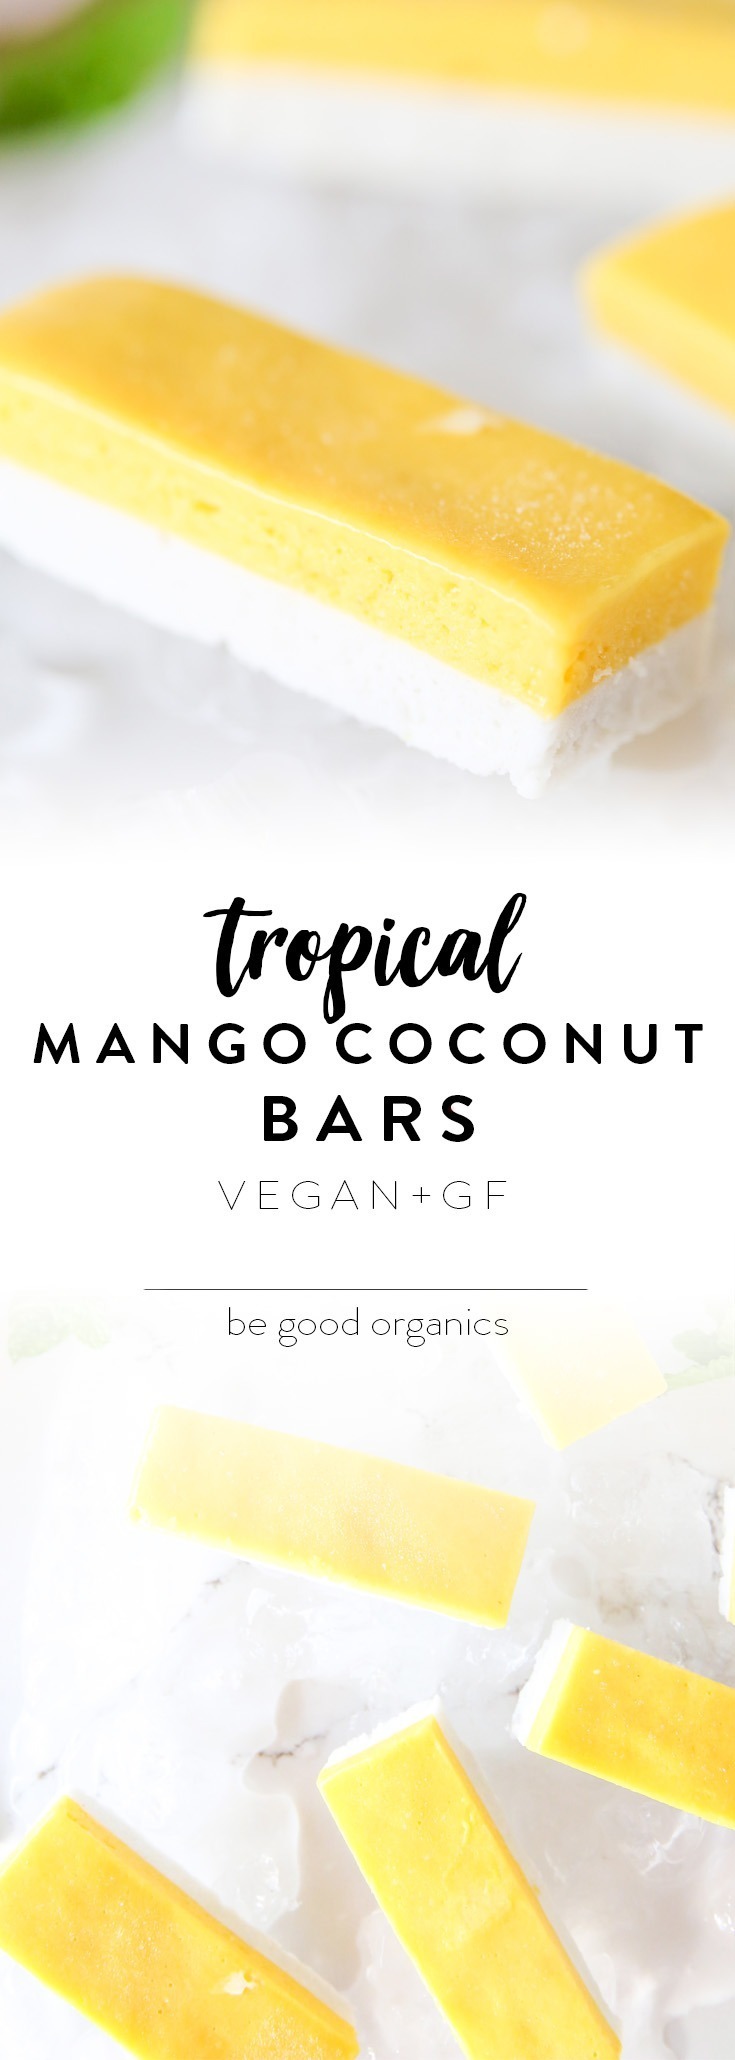 Ready for a ridiculously easy + quick remake of your fav Mango Weiss bars? 4 ingreds, 4 mins – it’s simple summer ice cream at its finest. Vegan, dairy free, egg free, lactose free, coconut milk ice cream.